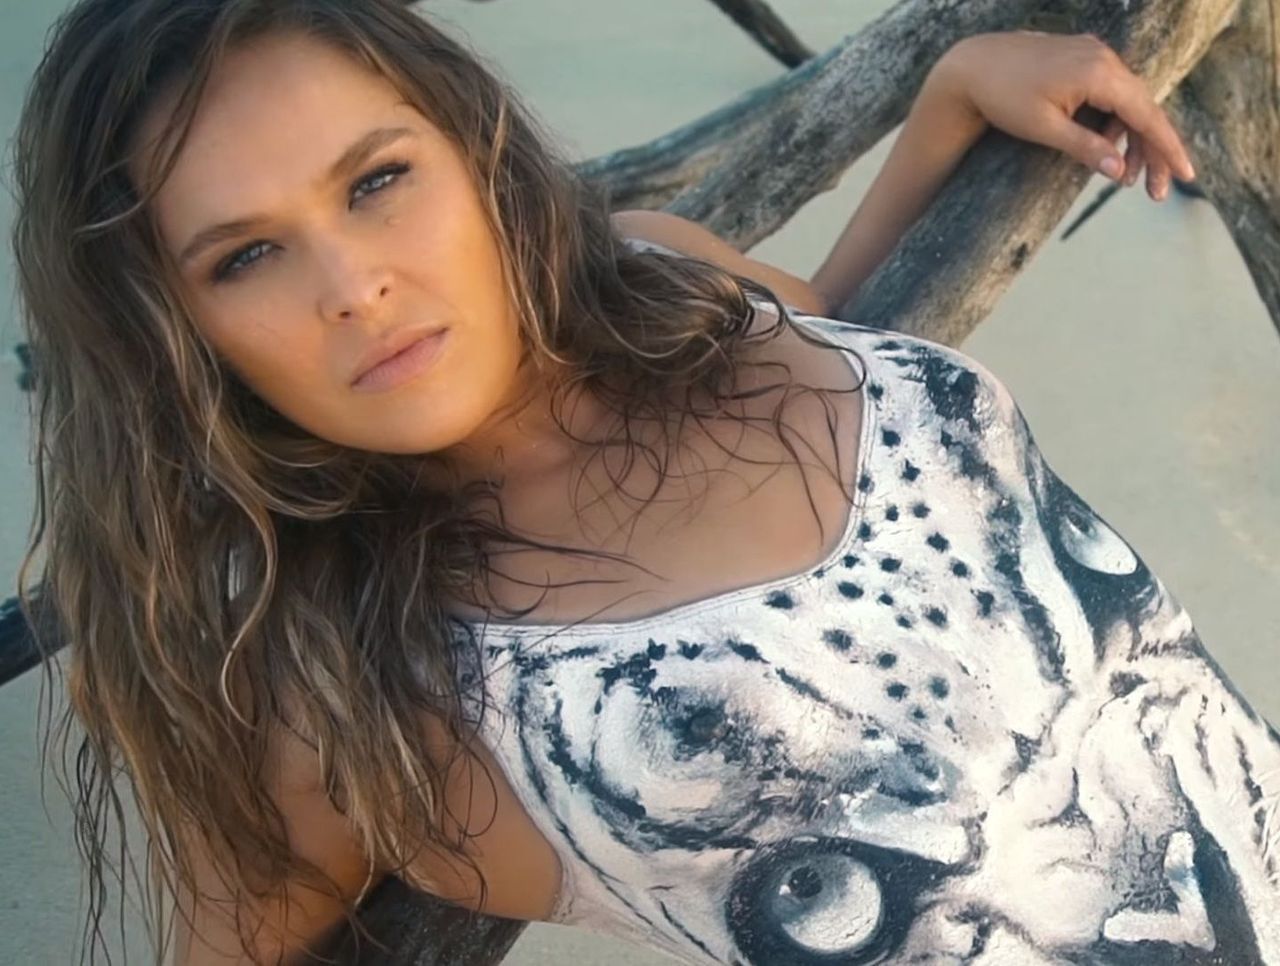 cashout king recommends ronda rousey body paint nipples pic